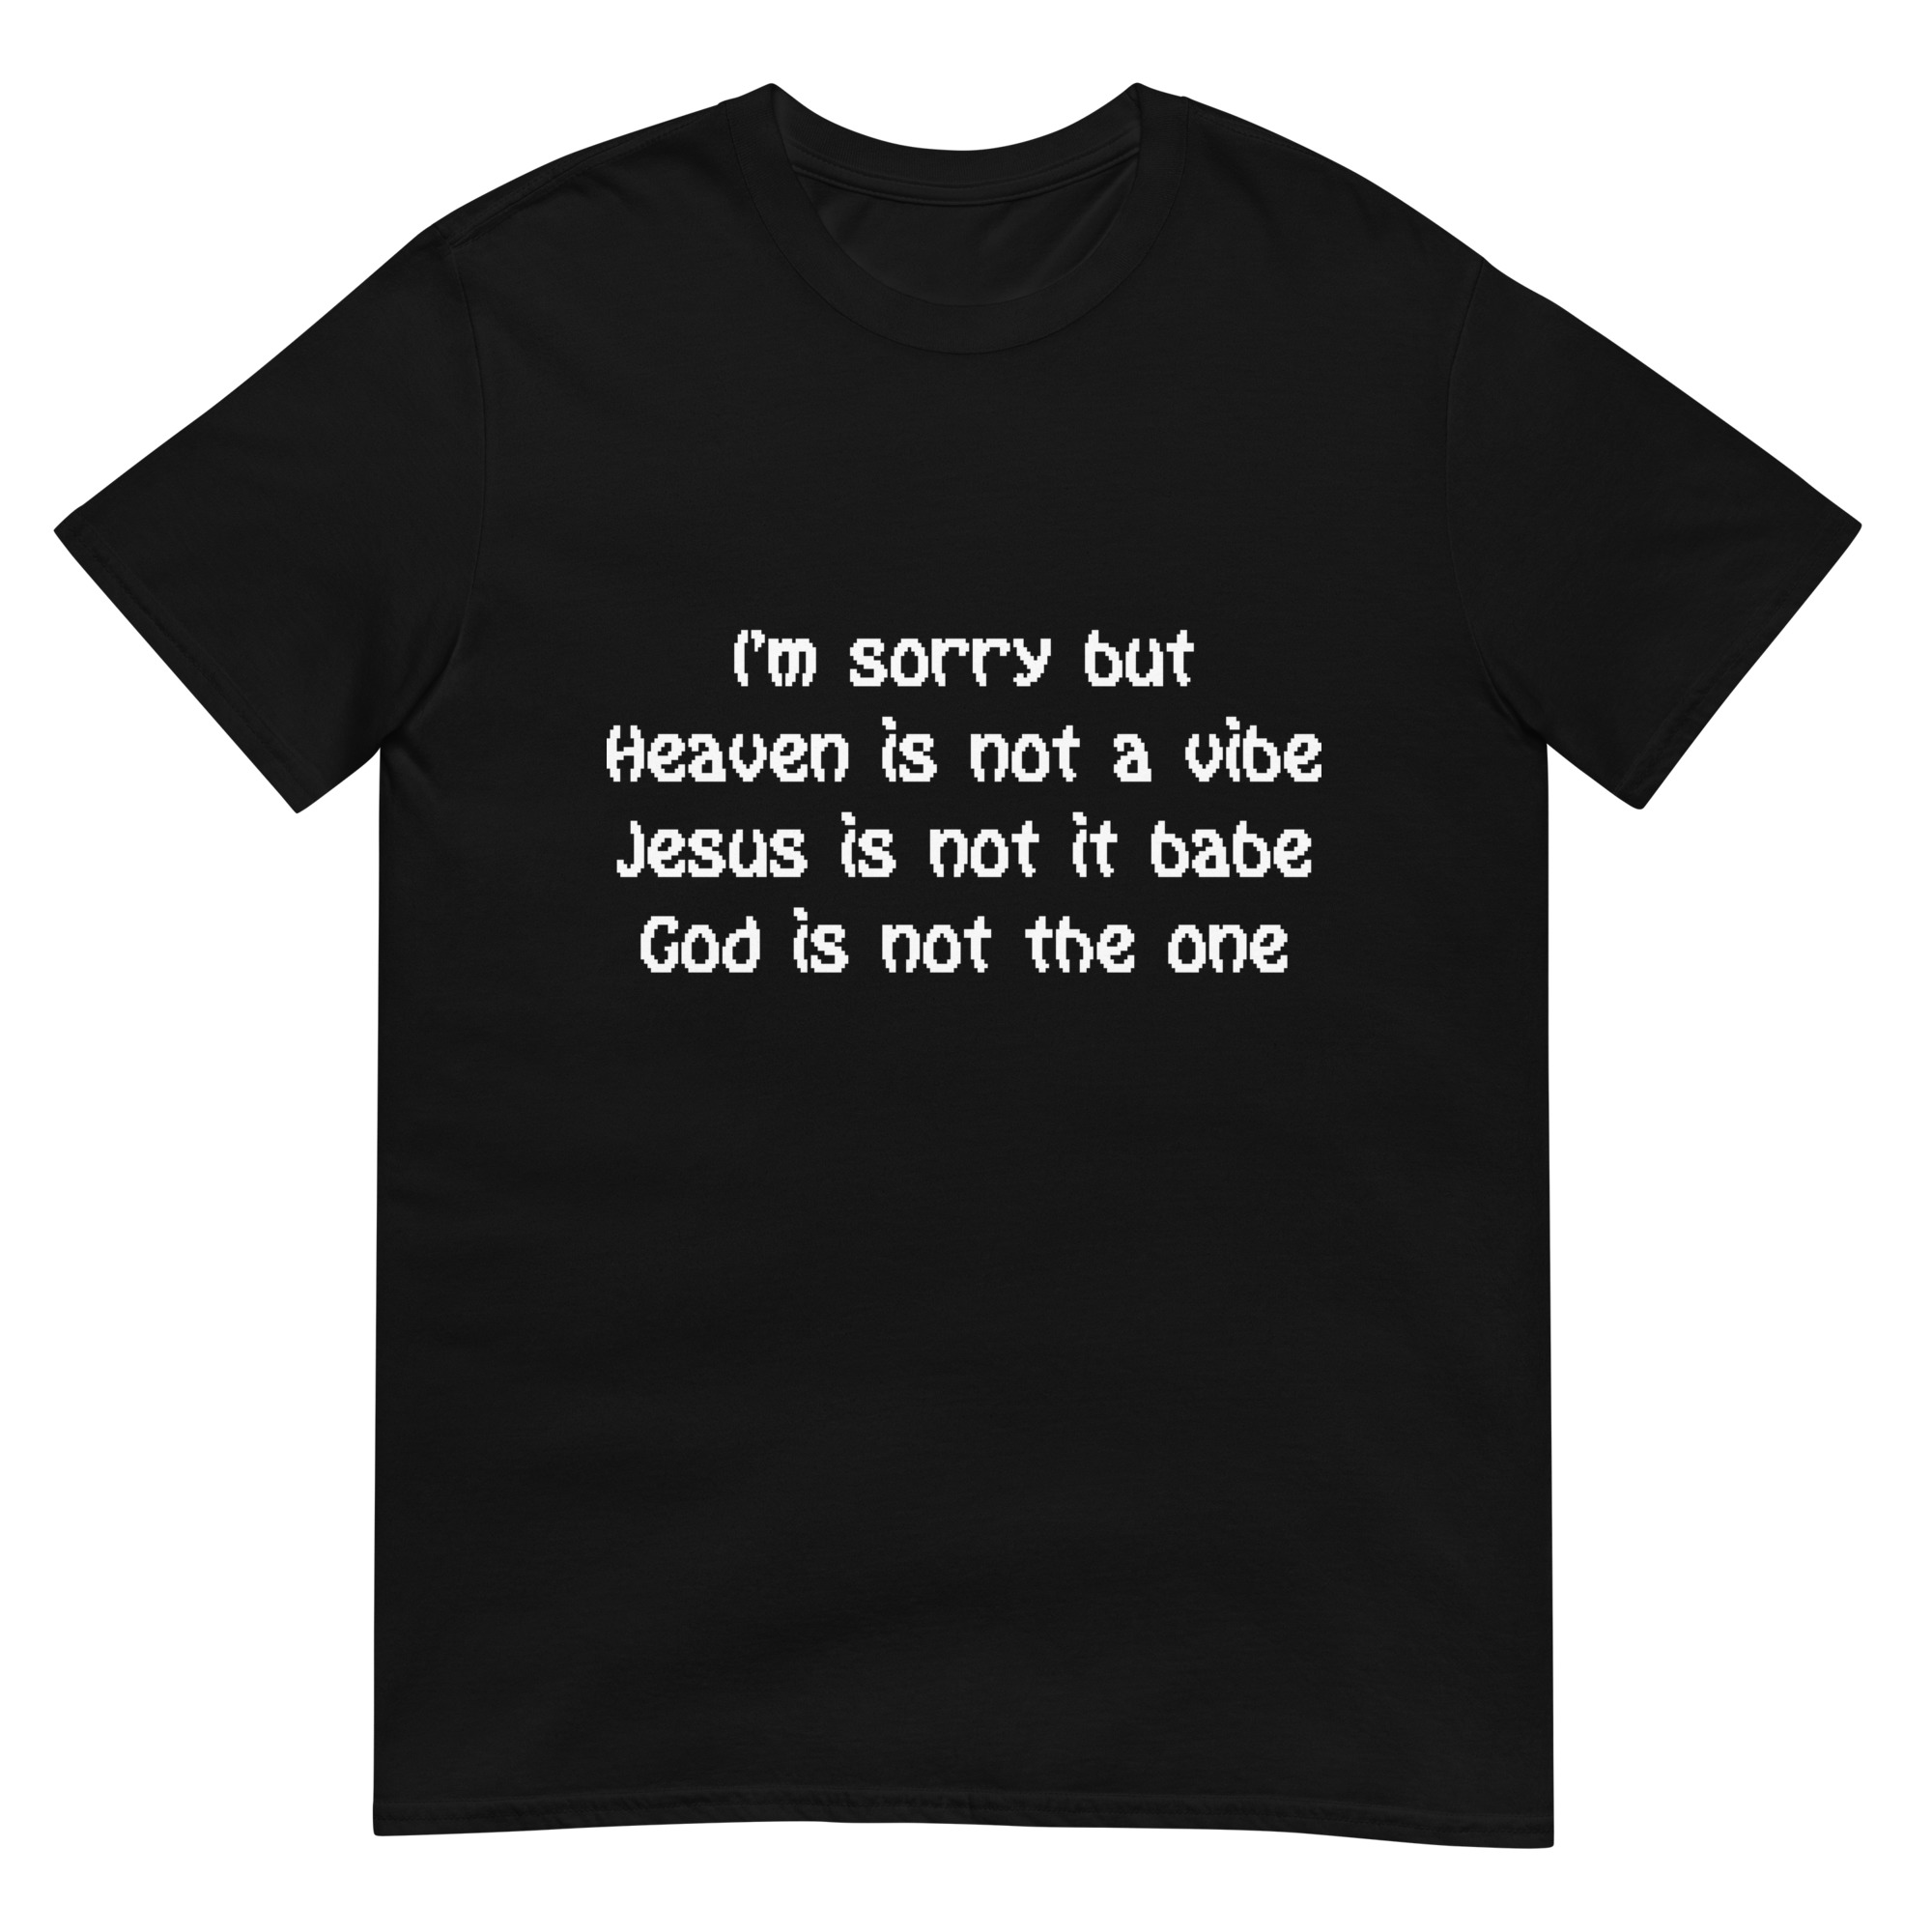 Featured image for “god is not the one - Short-Sleeve Unisex T-Shirt”